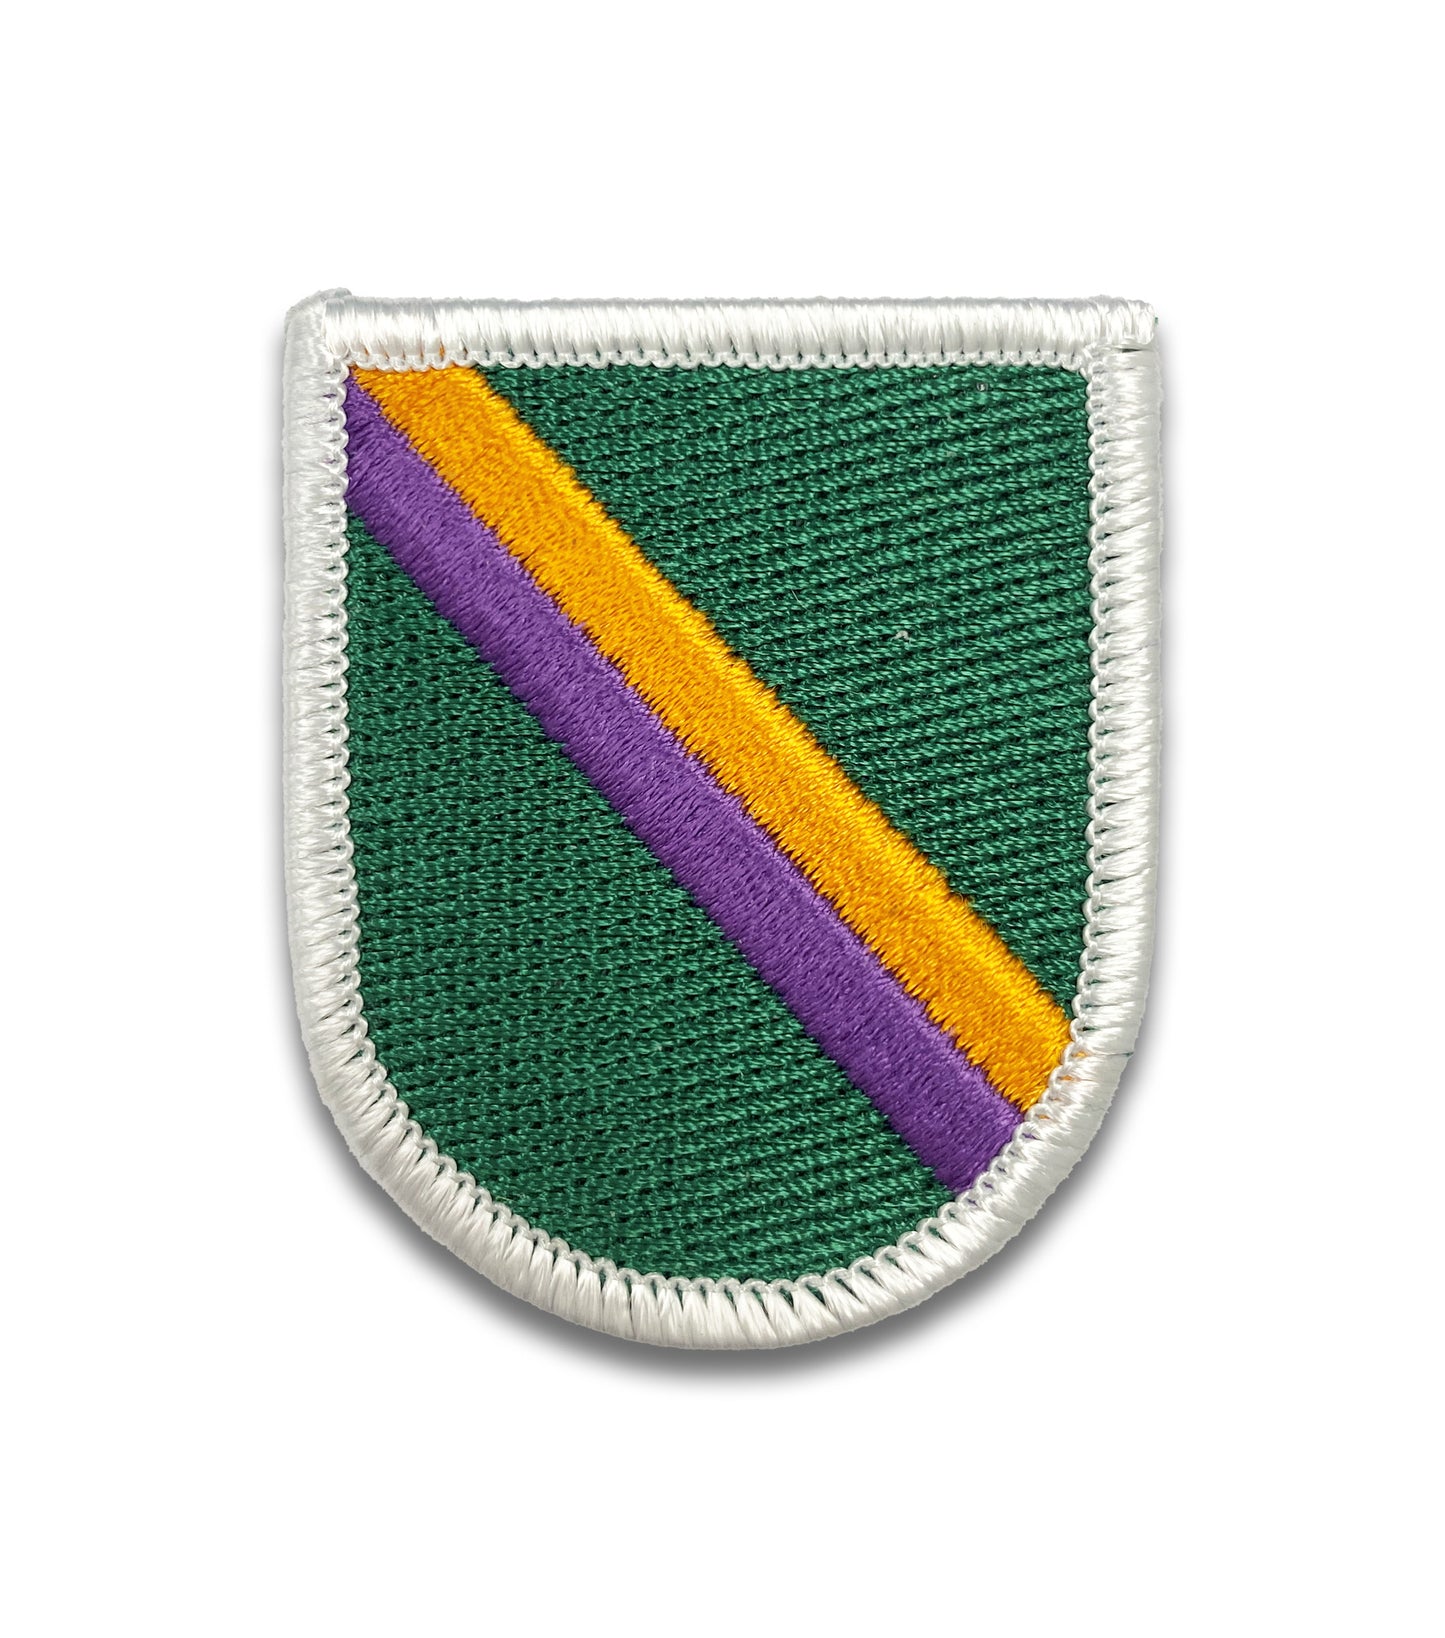 U.S. Army Civil Affairs and Psychological Operations Command Flash